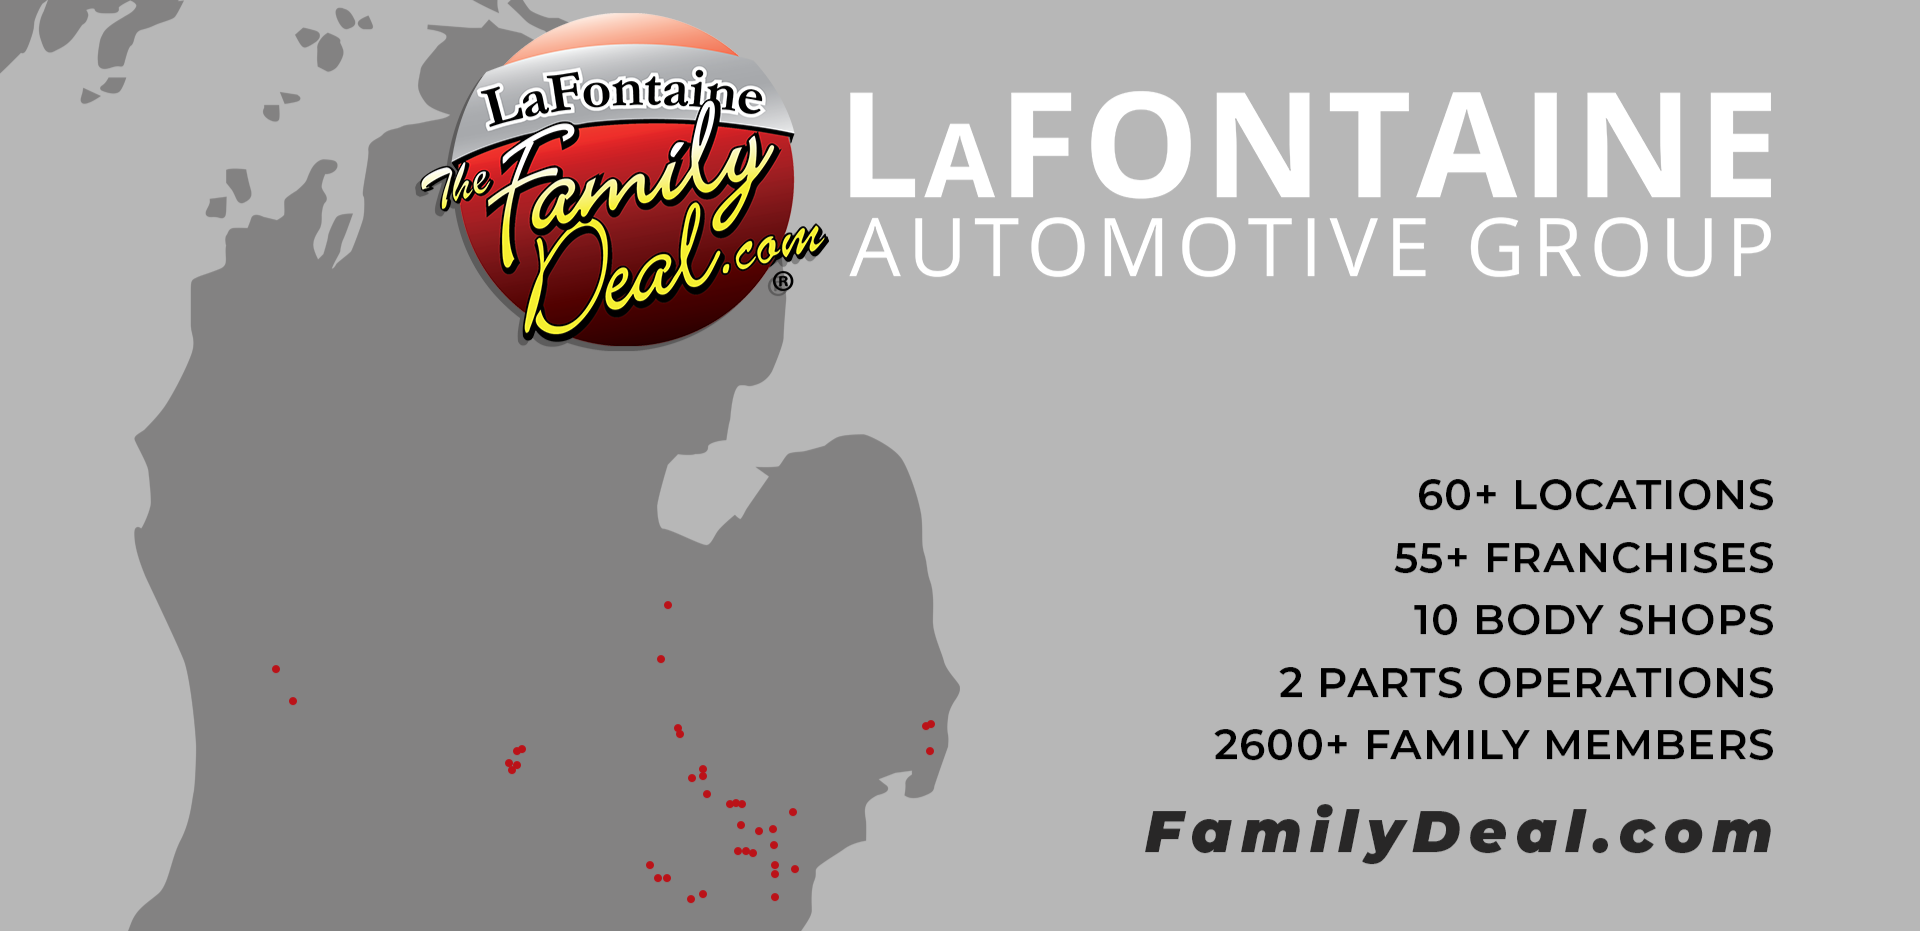 lafontaine family deal flyer